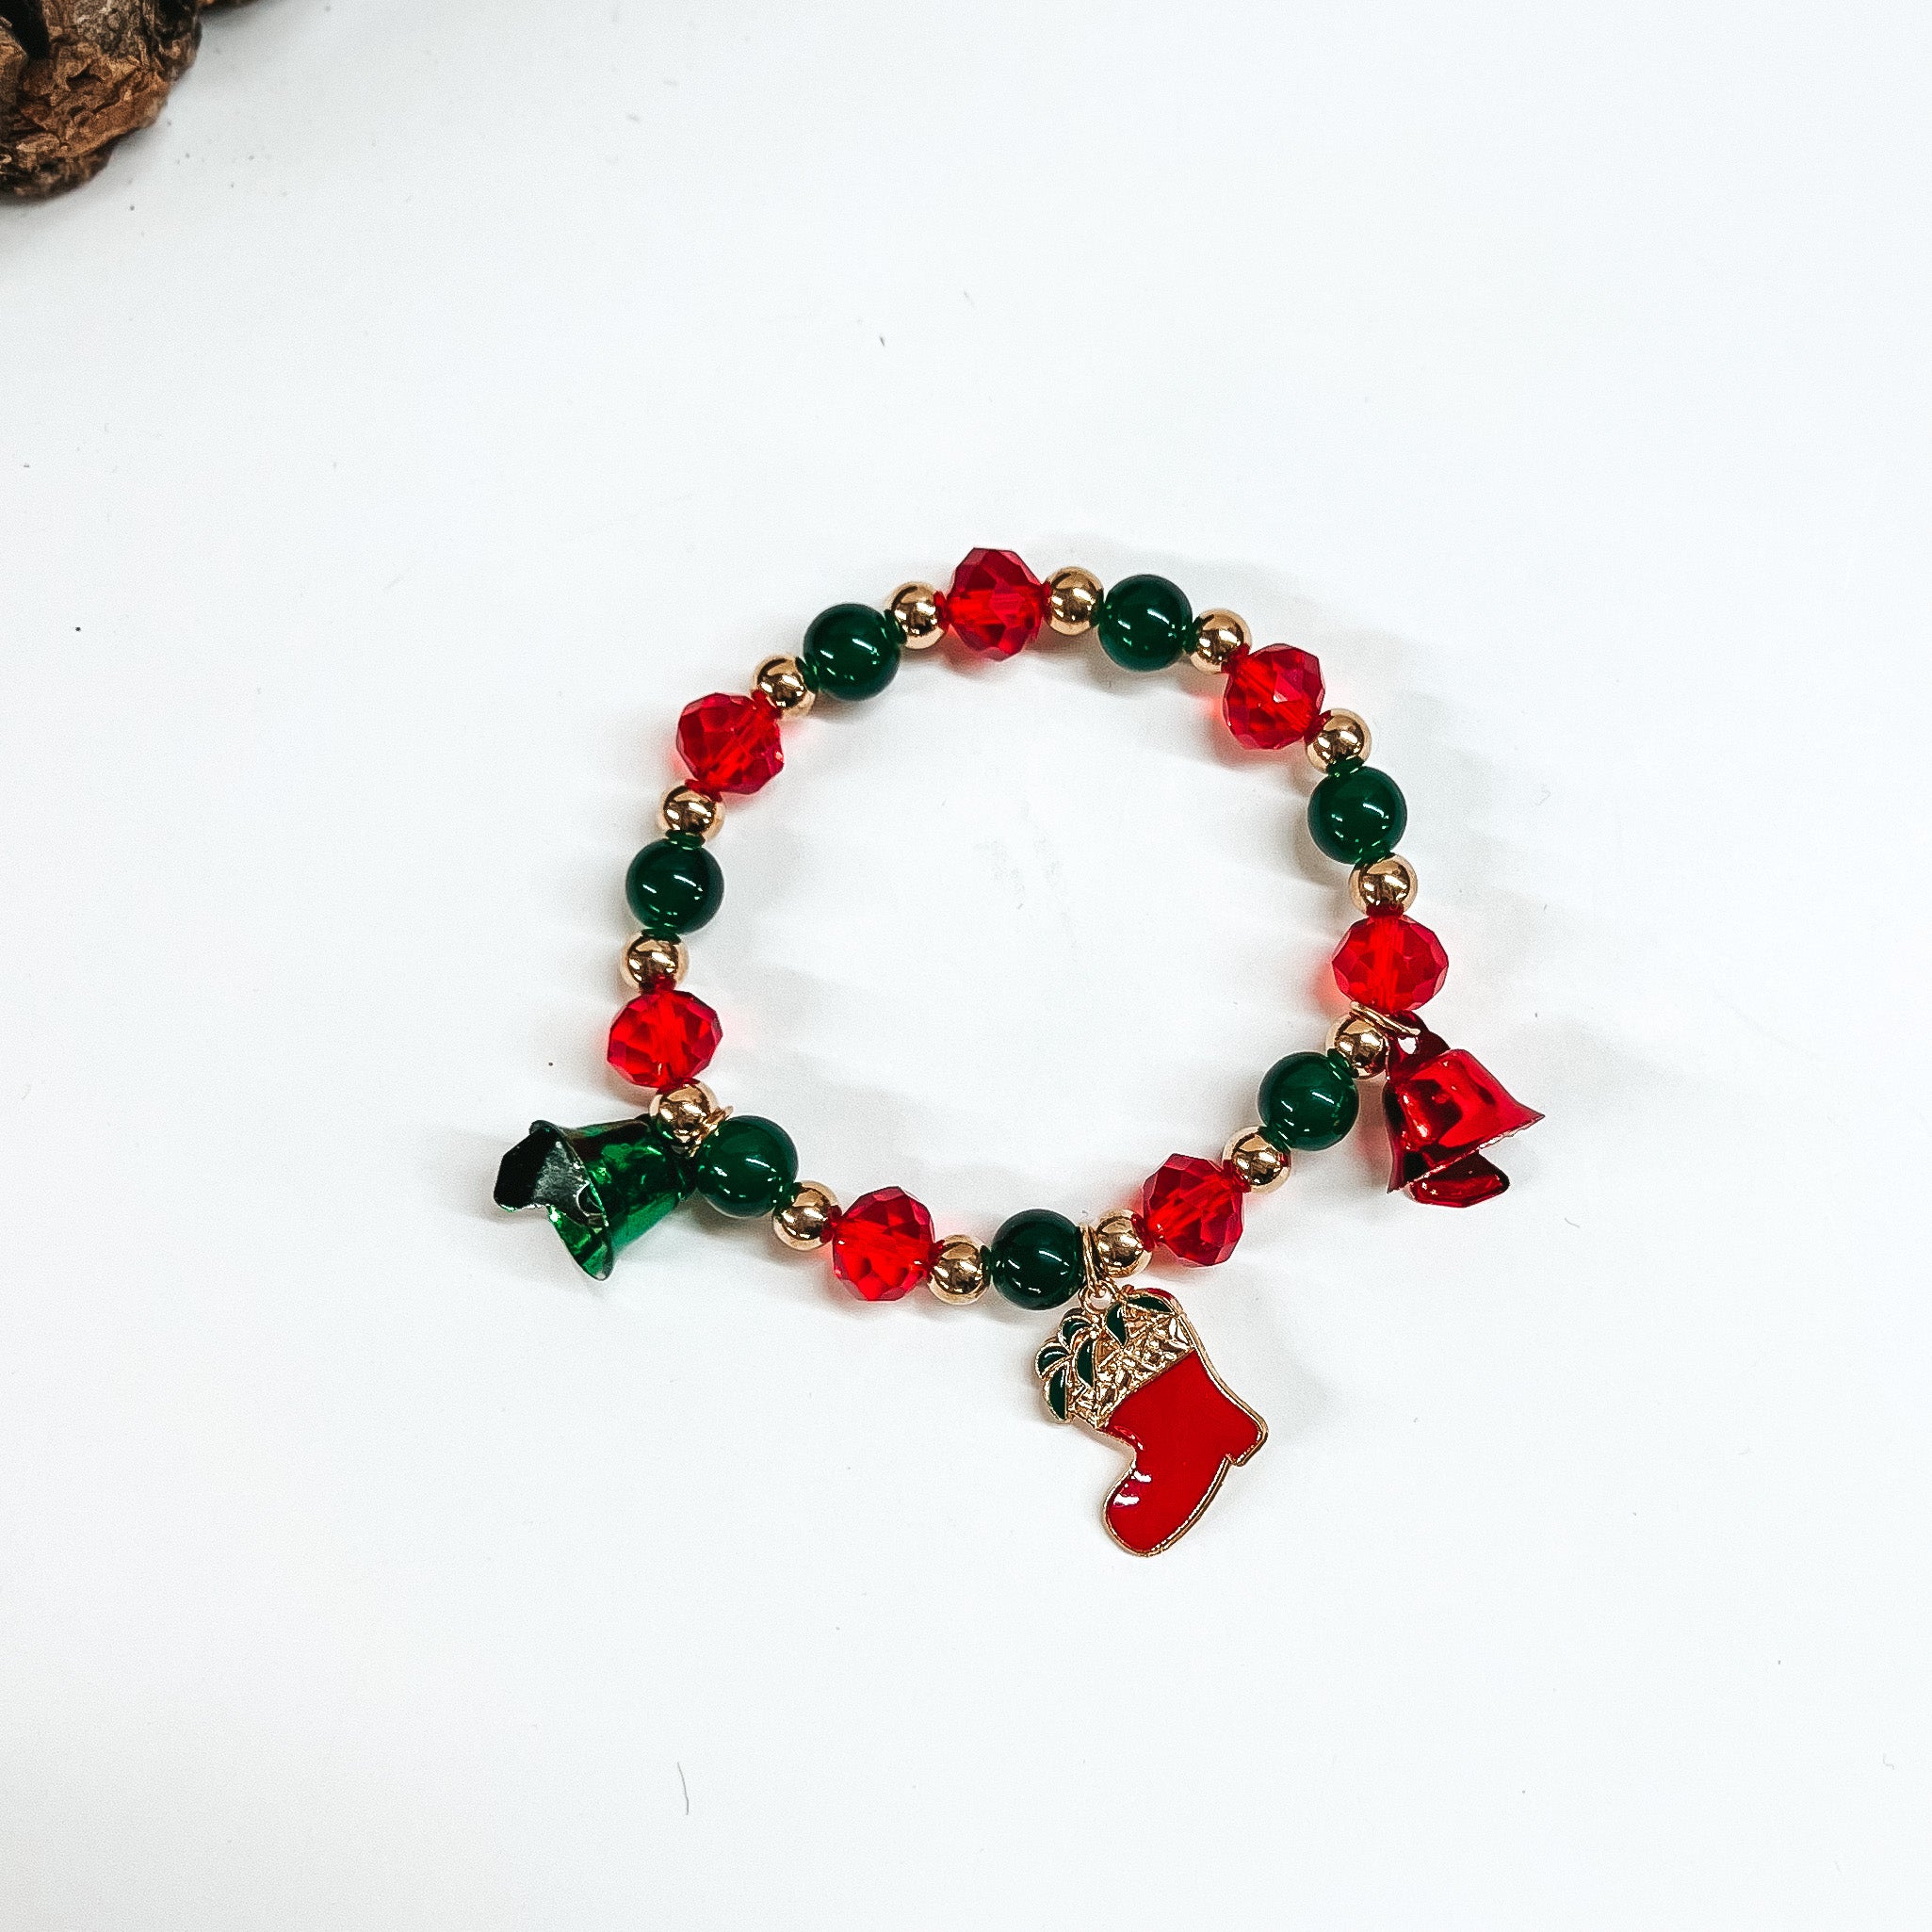 This is a beaded bracelet with three christmas charms such as two bells in red and green, and a gold and red stocking charm. This beaded bracelet has red crystal beads, gold circle beads, and green circle beads. This bracelet is laying on a white background with a slab of wood in the back as decor.